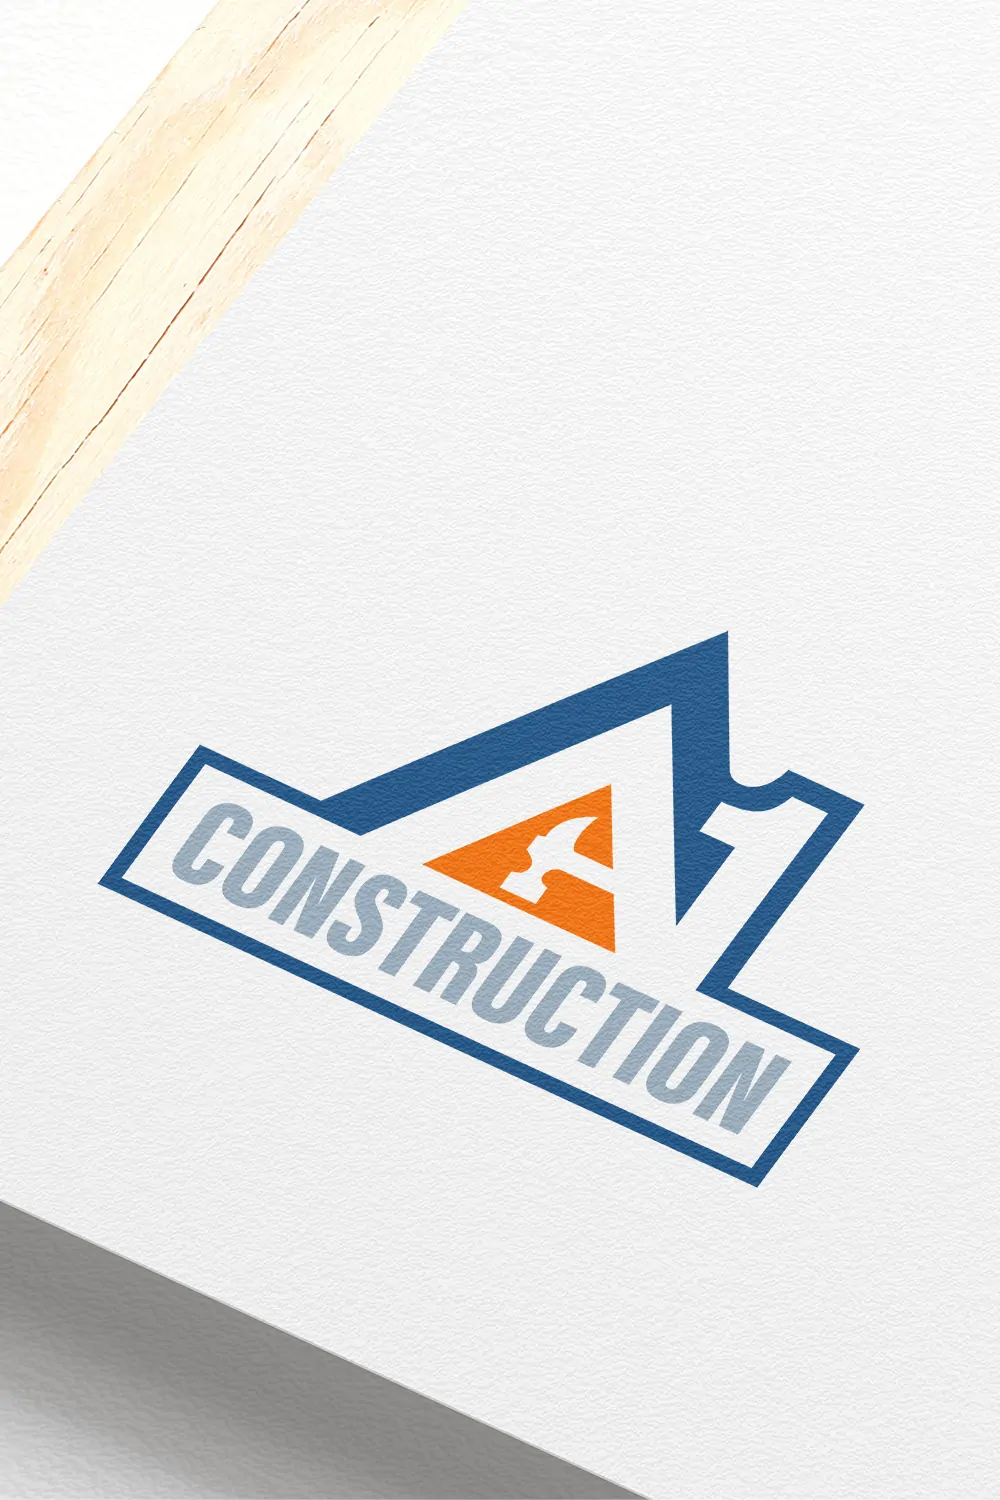 Logo of "a1 construction" featuring a stylized mountain and house silhouette inside a blue angular design, printed on textured white paper with a wooden pencil partially covering the top left corner.